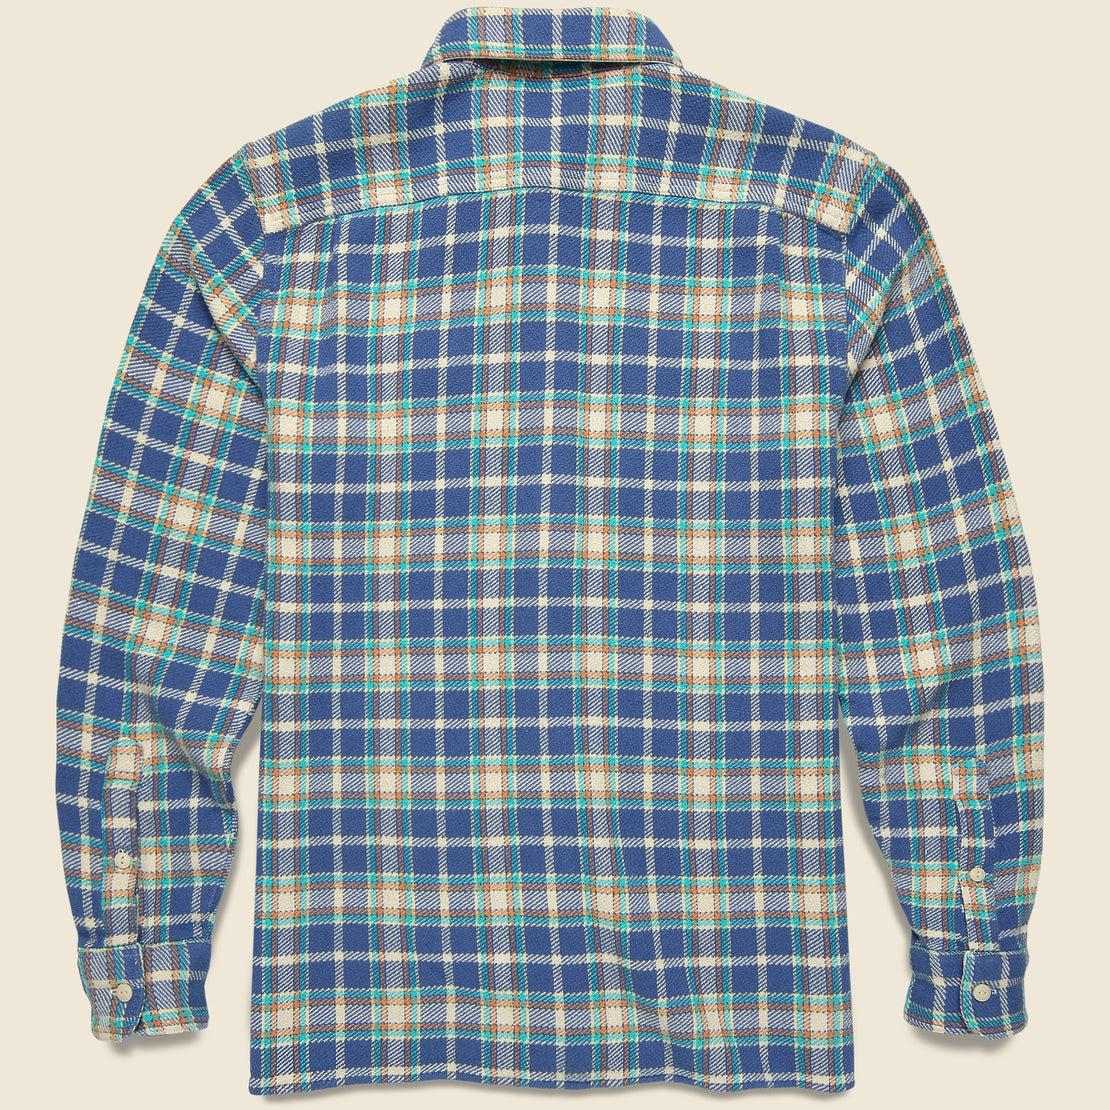 Surf Flannel - Landing Point Plaid - Faherty - STAG Provisions - Tops - L/S Woven - Plaid